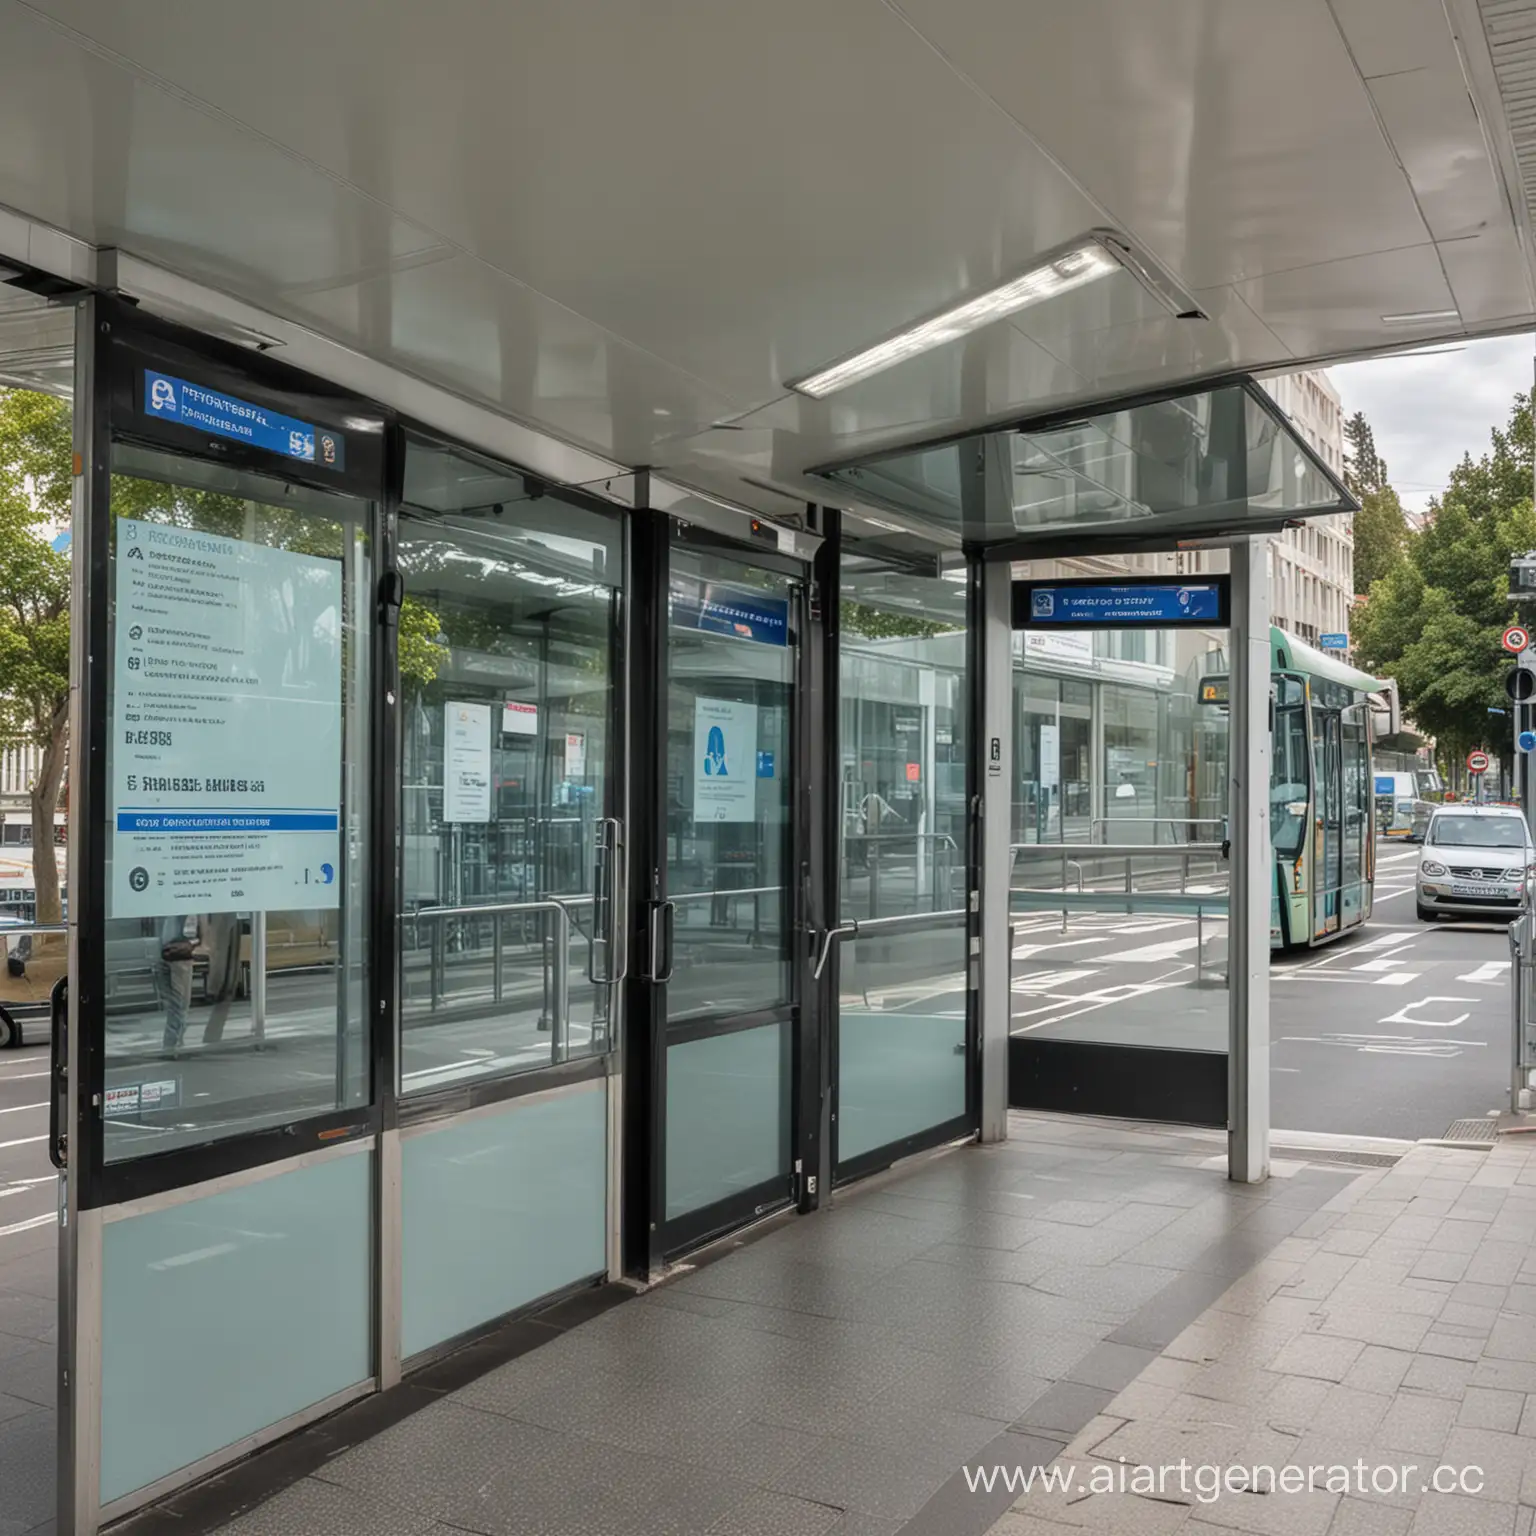 Modern-Public-Transport-Stop-with-Glass-Doors-and-Information-Panels